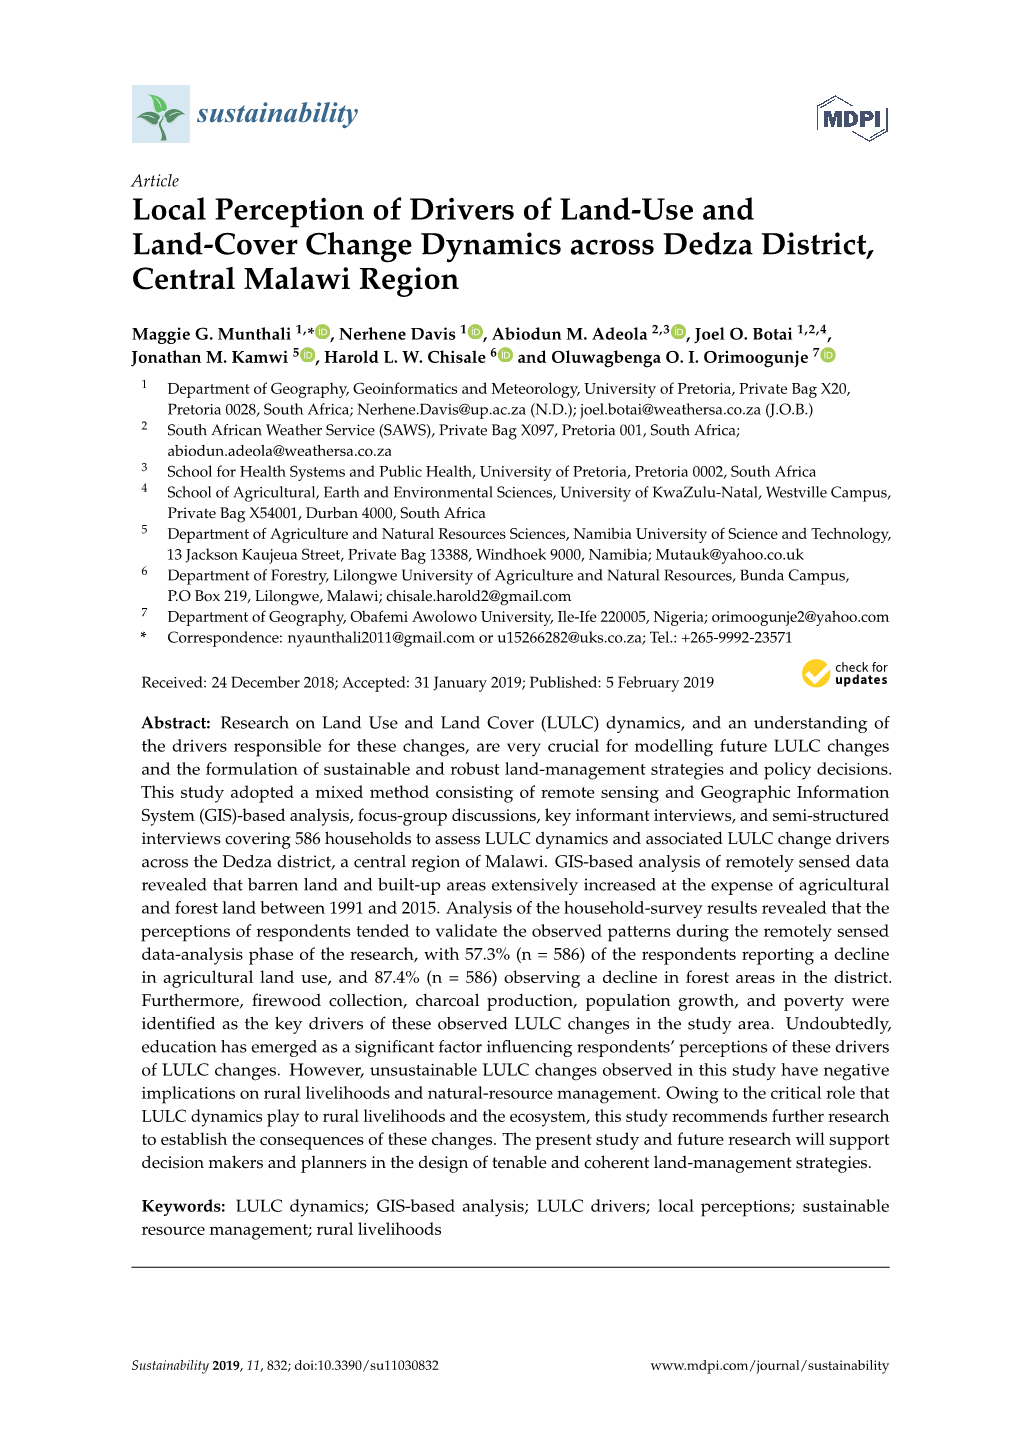 Local Perception of Drivers of Land-Use and Land-Cover Change Dynamics Across Dedza District, Central Malawi Region